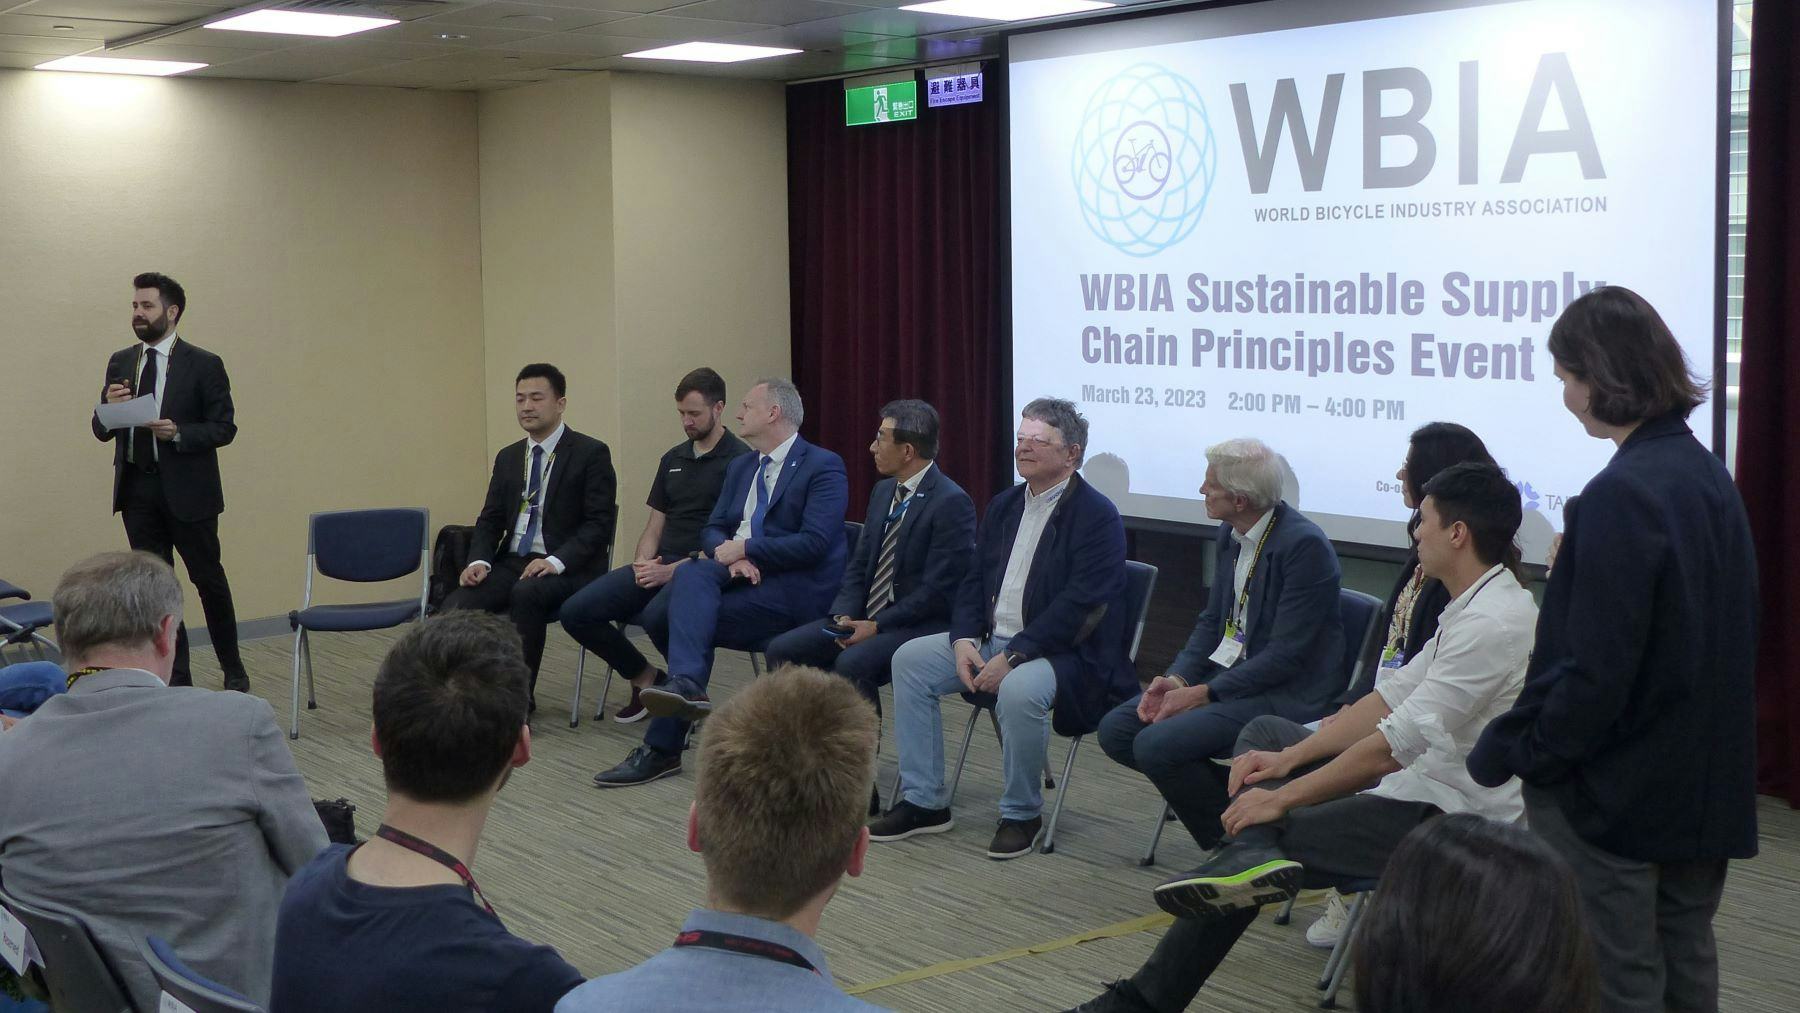 The event will follow up on the Sustainable Supply Chain Principles which were announced at last years event at Taipei Cycle show. – Photo Bike Europe